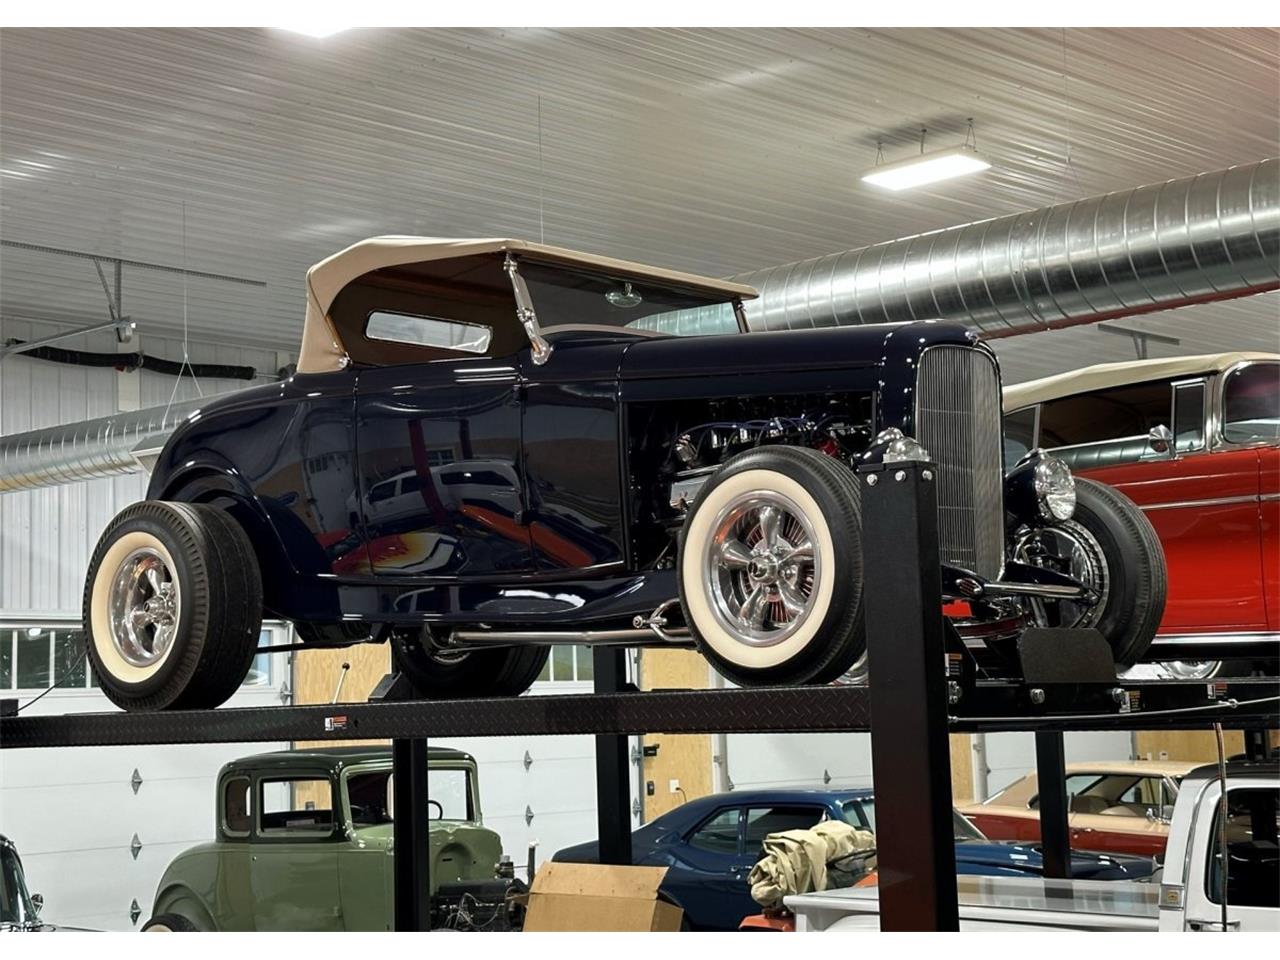 For Sale: 1932 Ford Roadster in Lake Hiawatha, New Jersey for sale in Lake Hiawatha, NJ